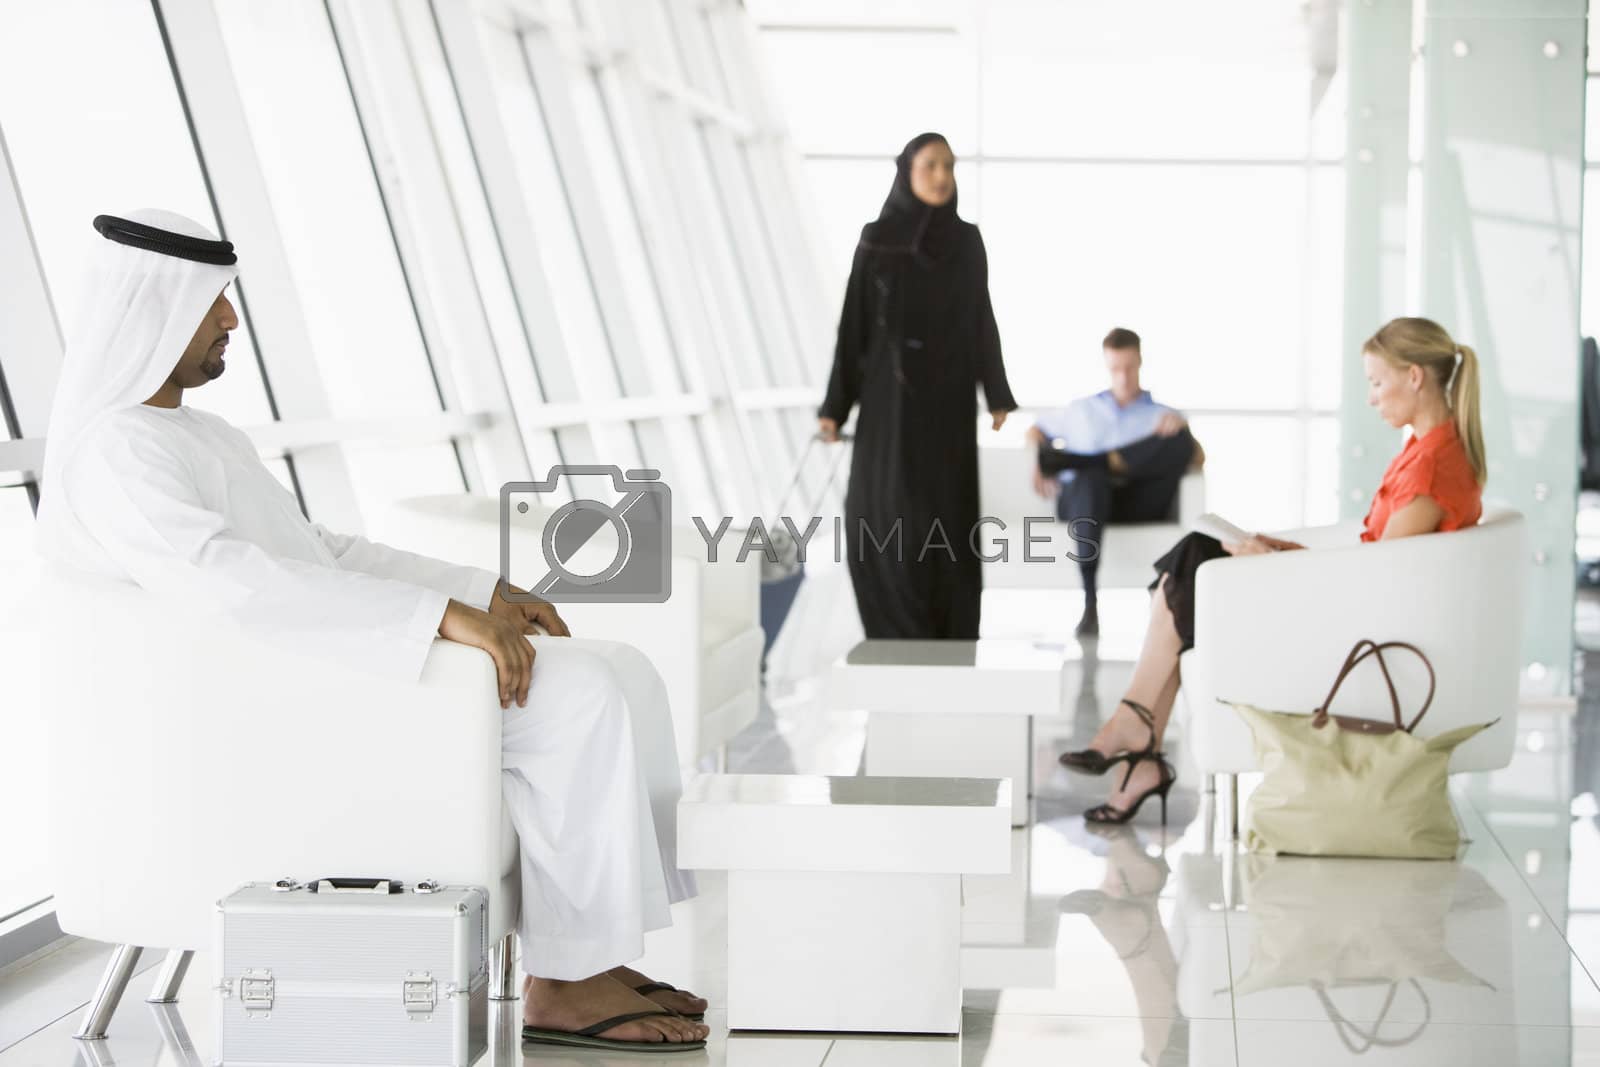 Royalty free image of Passengers waiting in airport departure lounge  by MonkeyBusiness